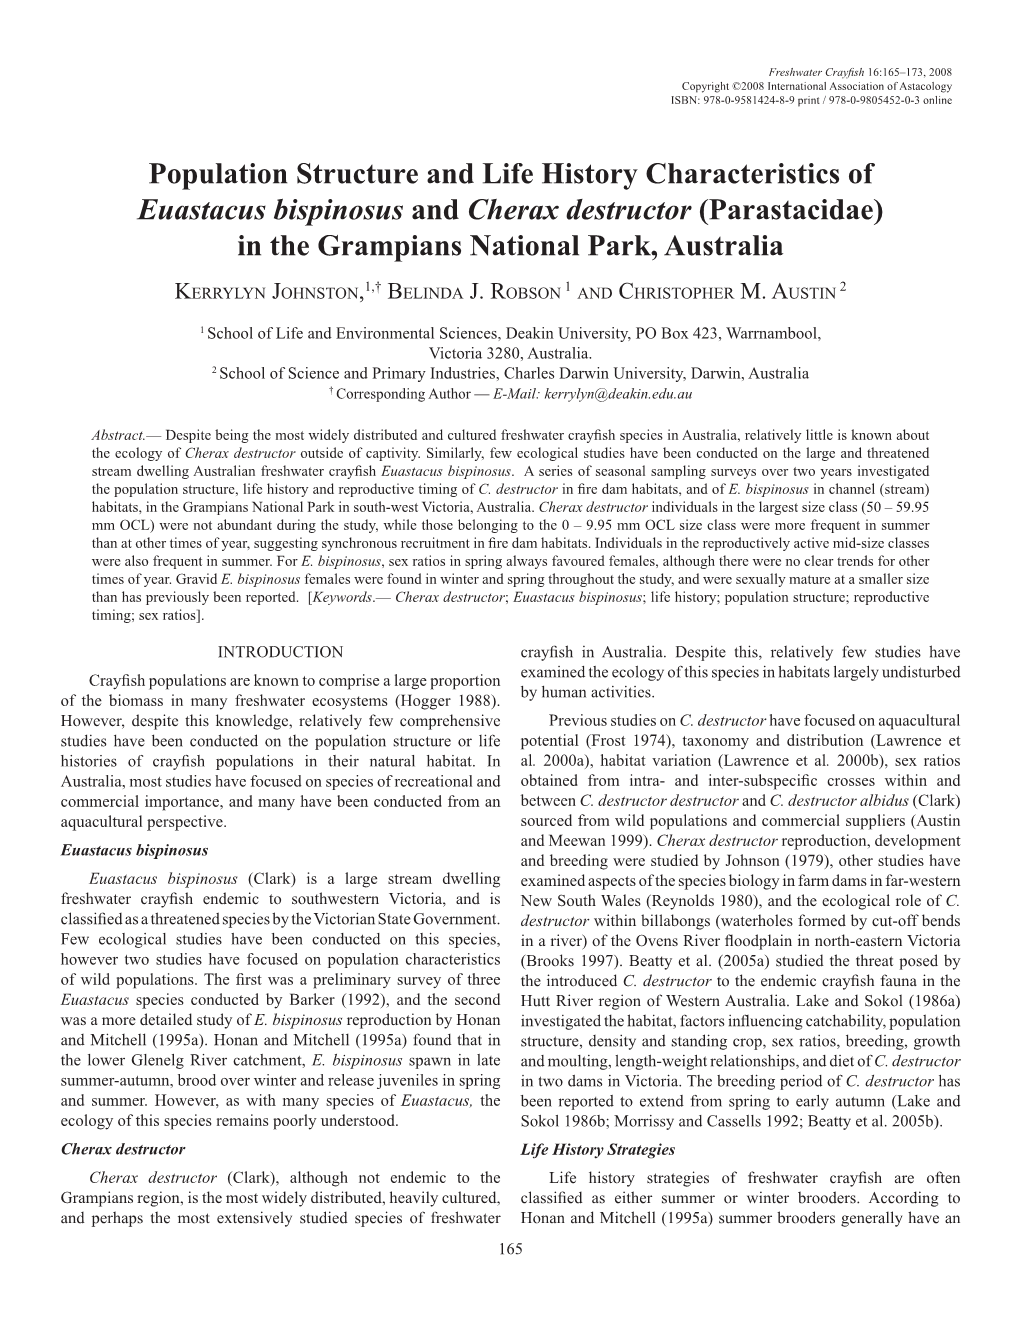 Population Structure and Life History Characteristics of Euastacus Bispinosus and Cherax Destructor (Parastacidae) in the Grampians National Park, Australia